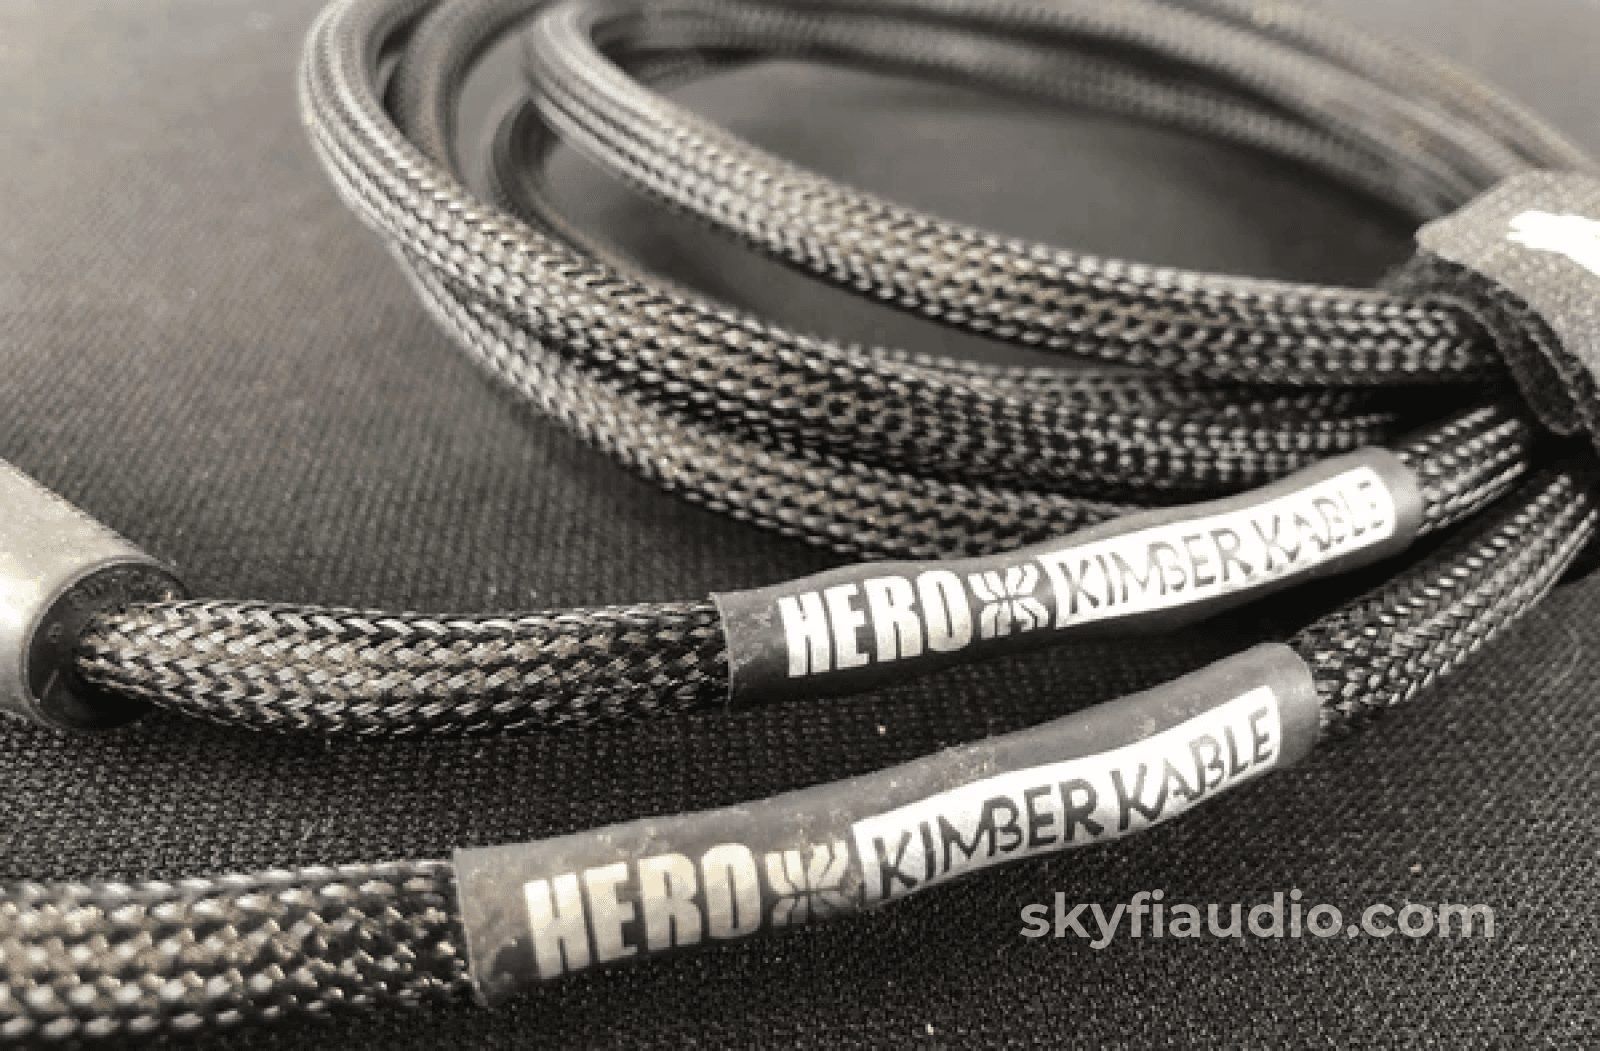 Kimber Kable Ascent Series - Hero Xlr Interconnects (Pair) 1M Cables